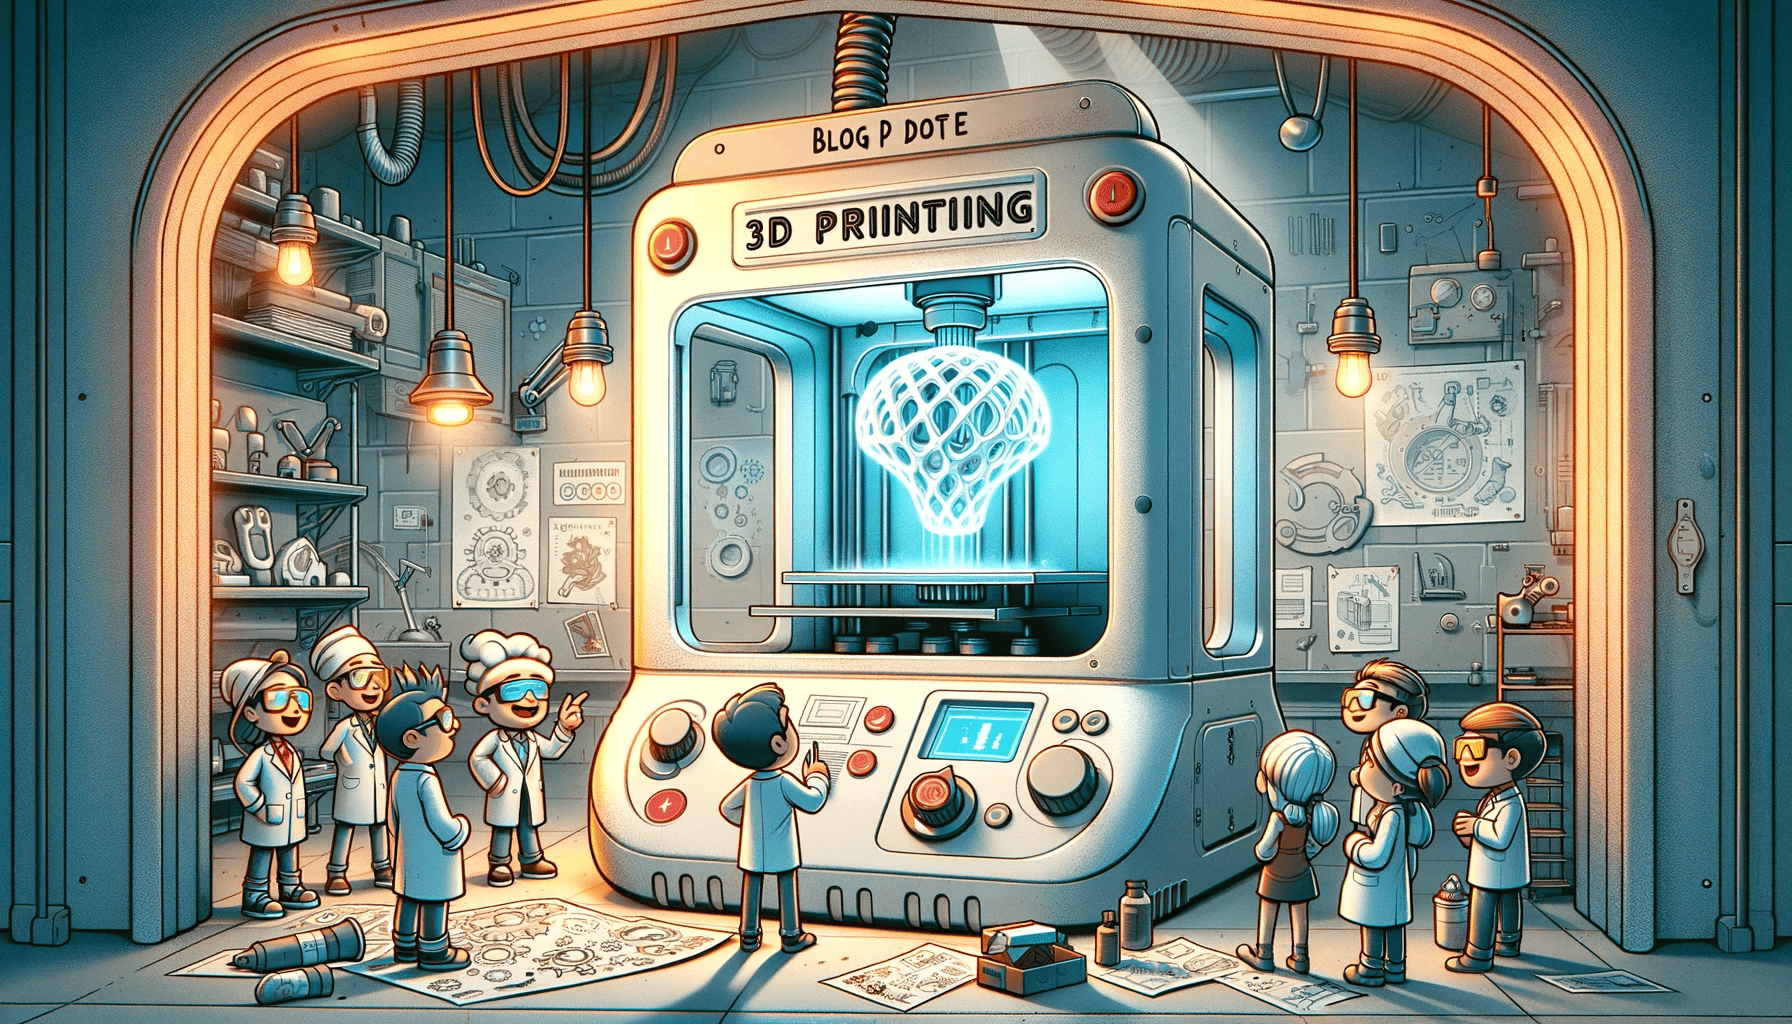 What is 3D Printing Really About